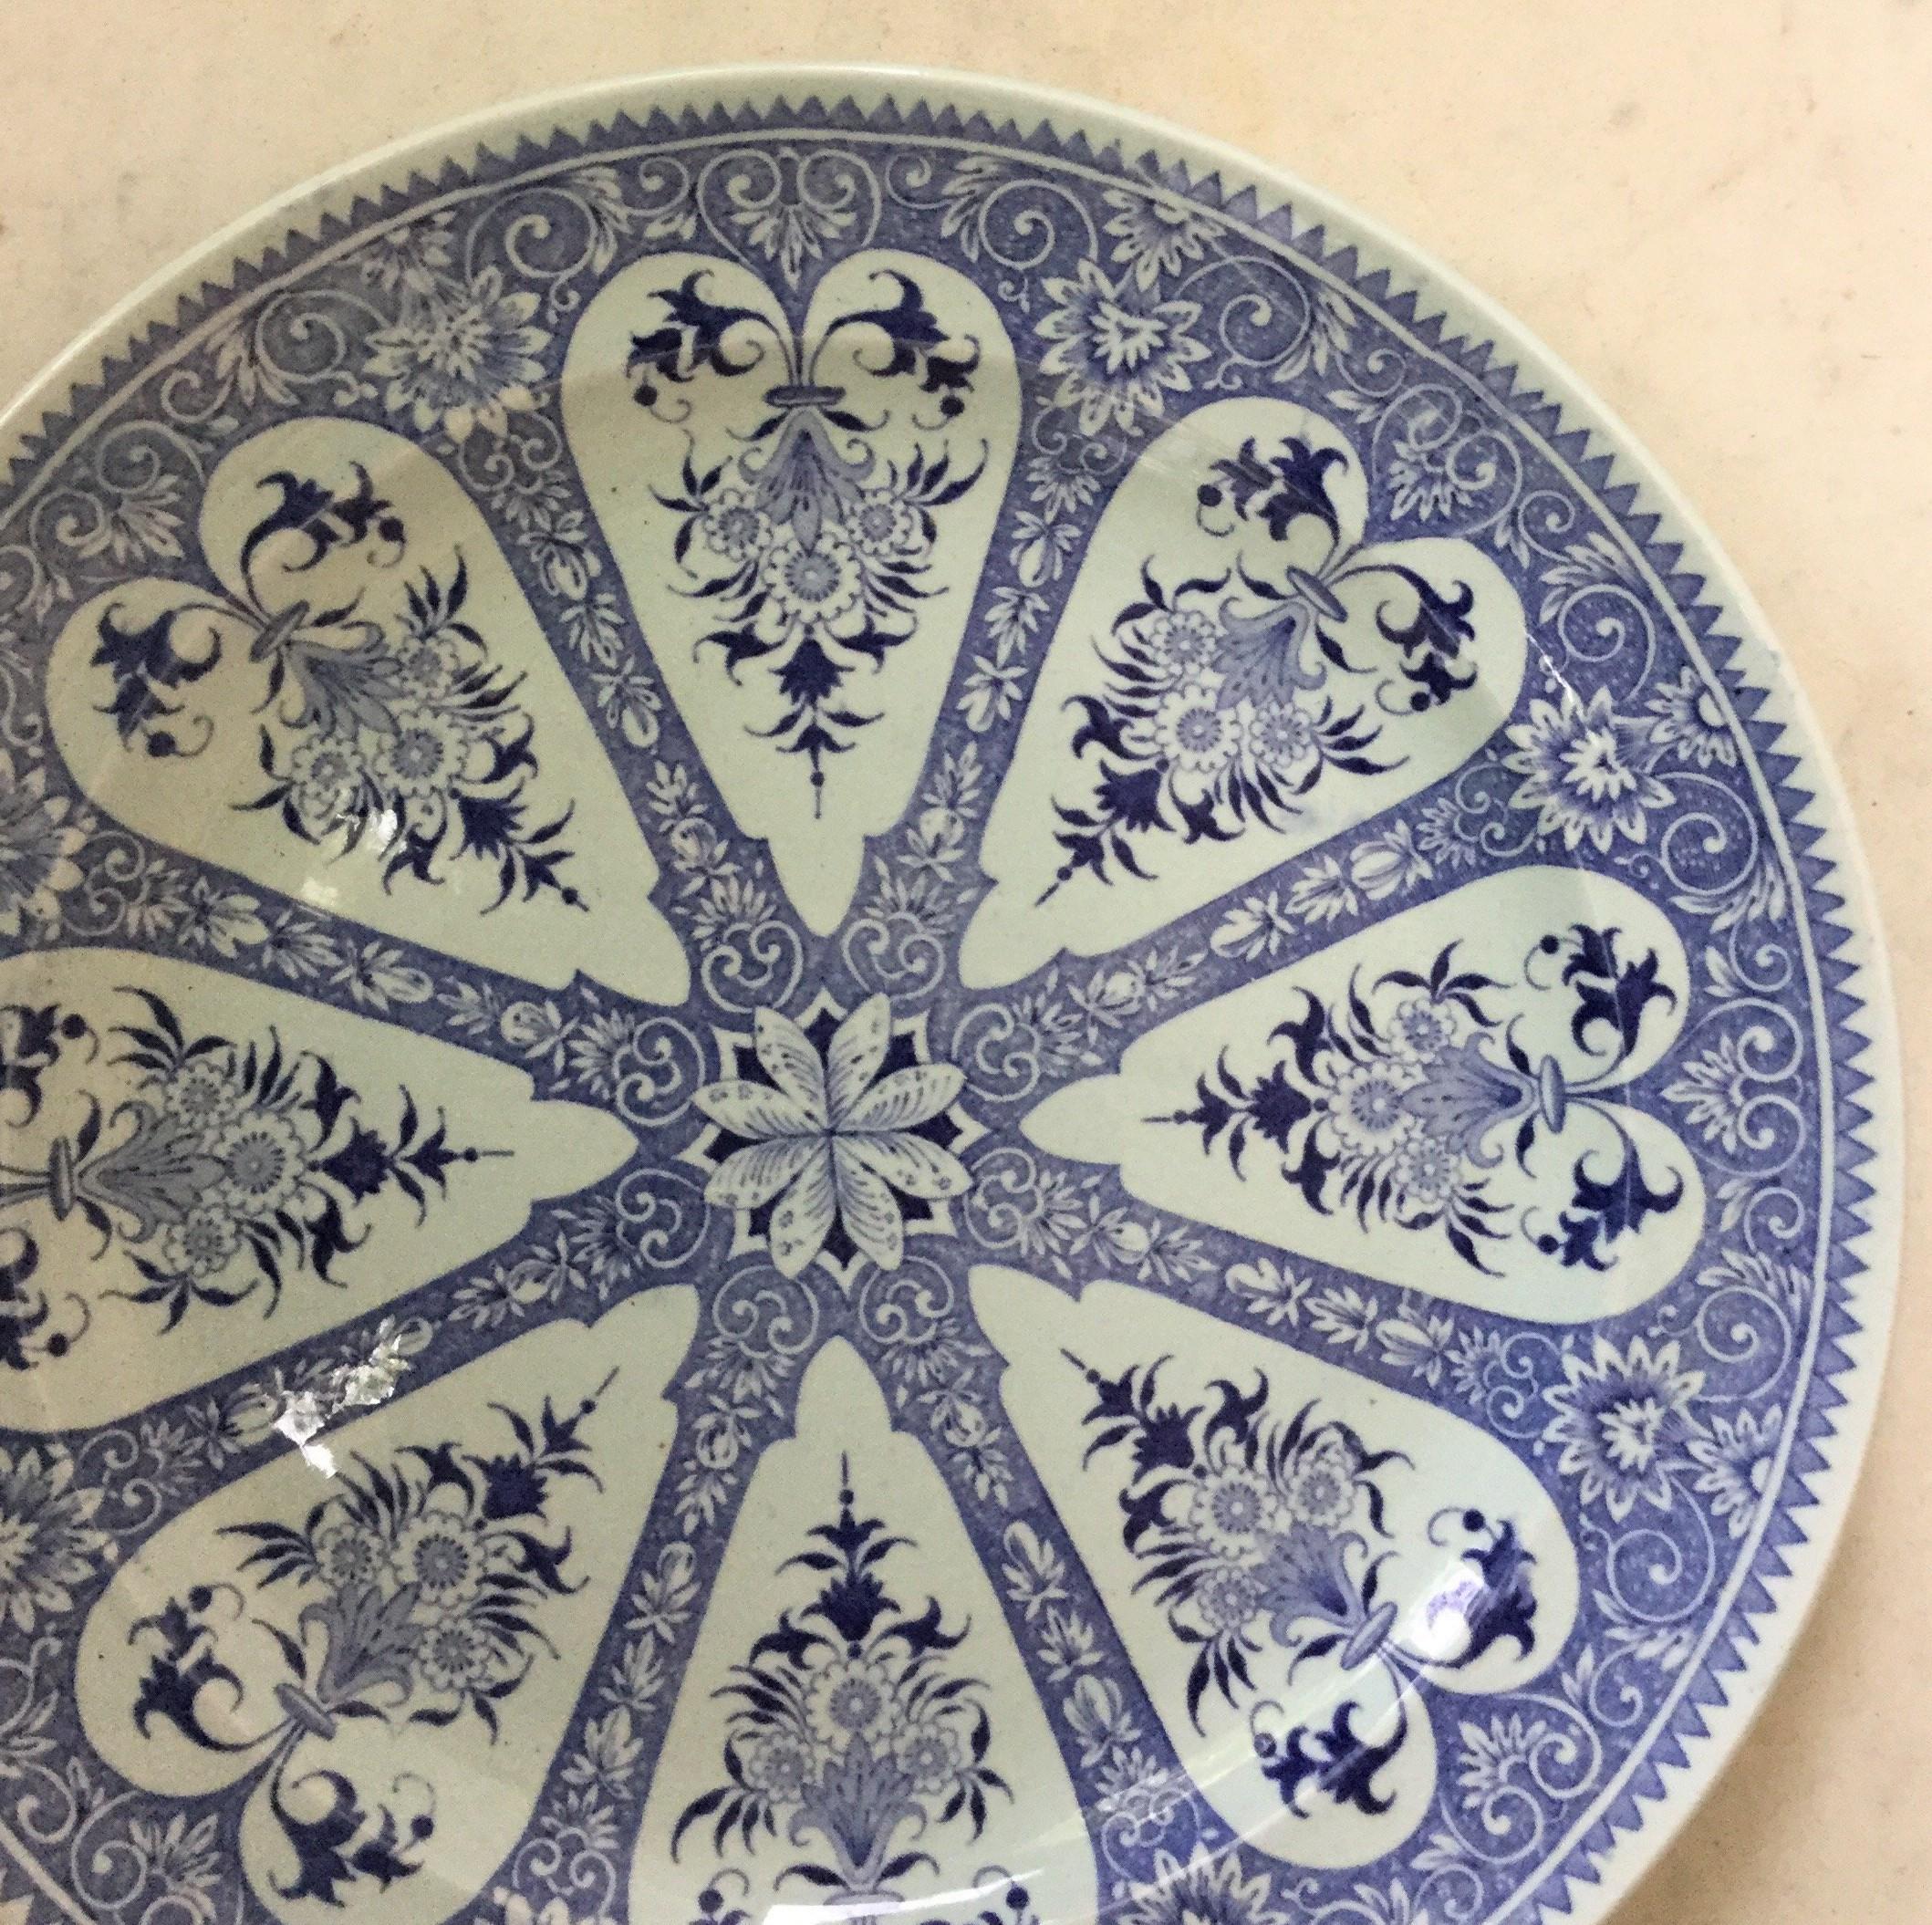 French Provincial 19th Century French Blue and White Faience Dinner Plate Sarreguemines